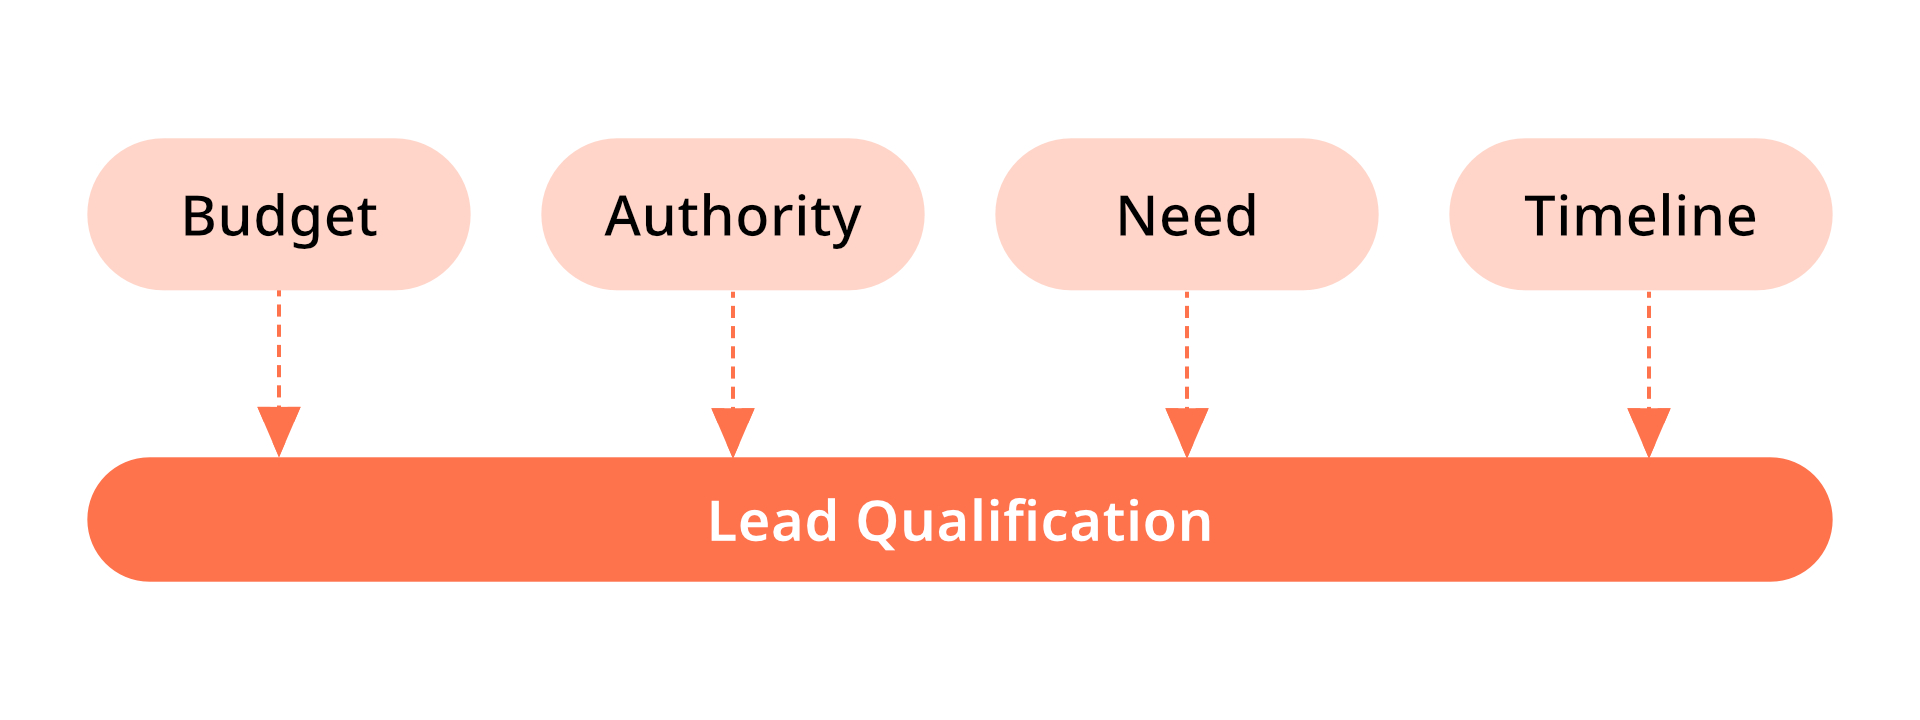 All Elements of the BANT Principle Used for Lead Qualification